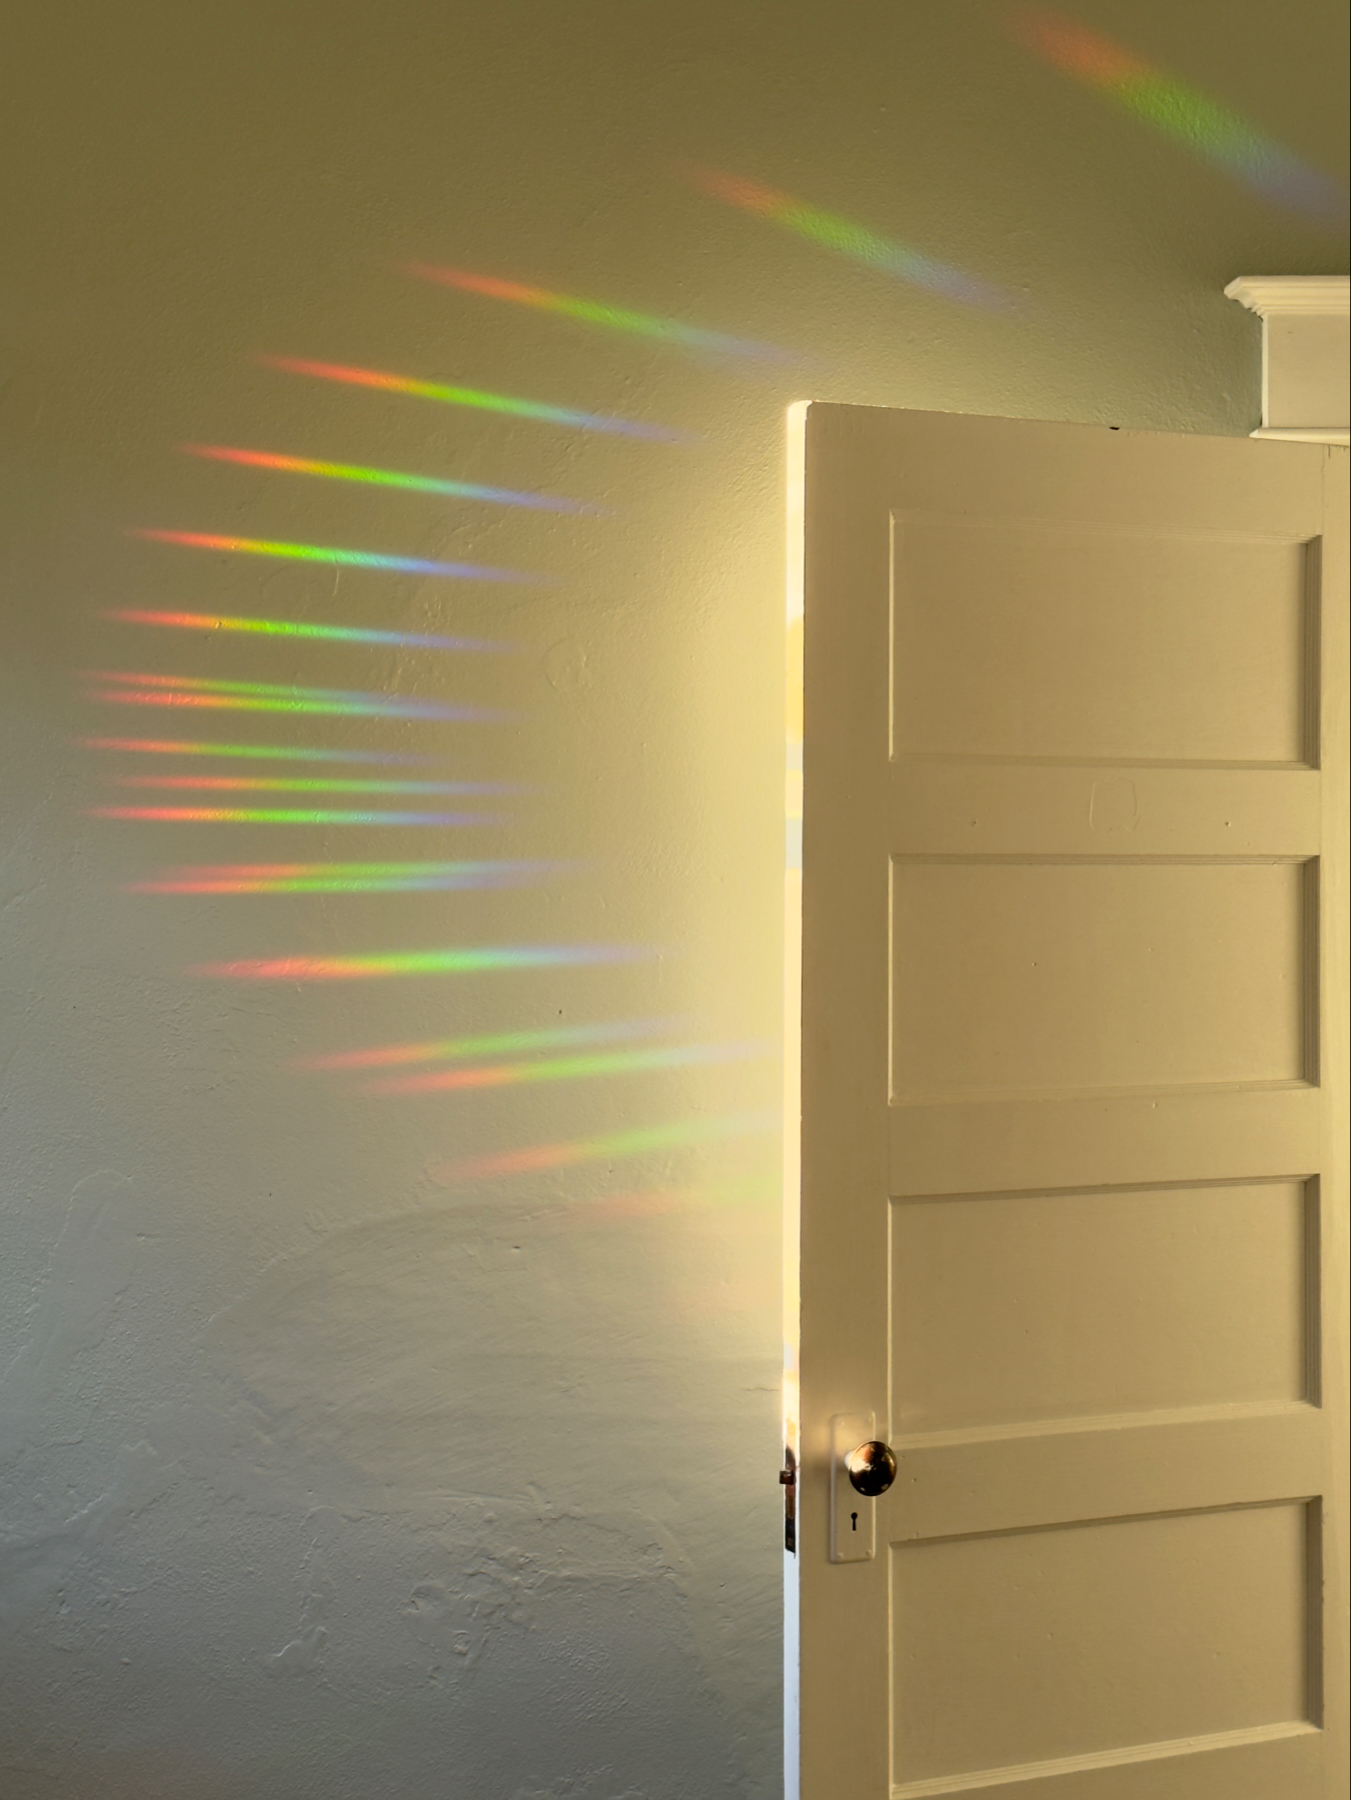 Warm evening golden light falls on an open white door with a bluish wall behind. On the wall is a geometric pattern of prismatic rainbow colored spikes in a semicircular pattern.